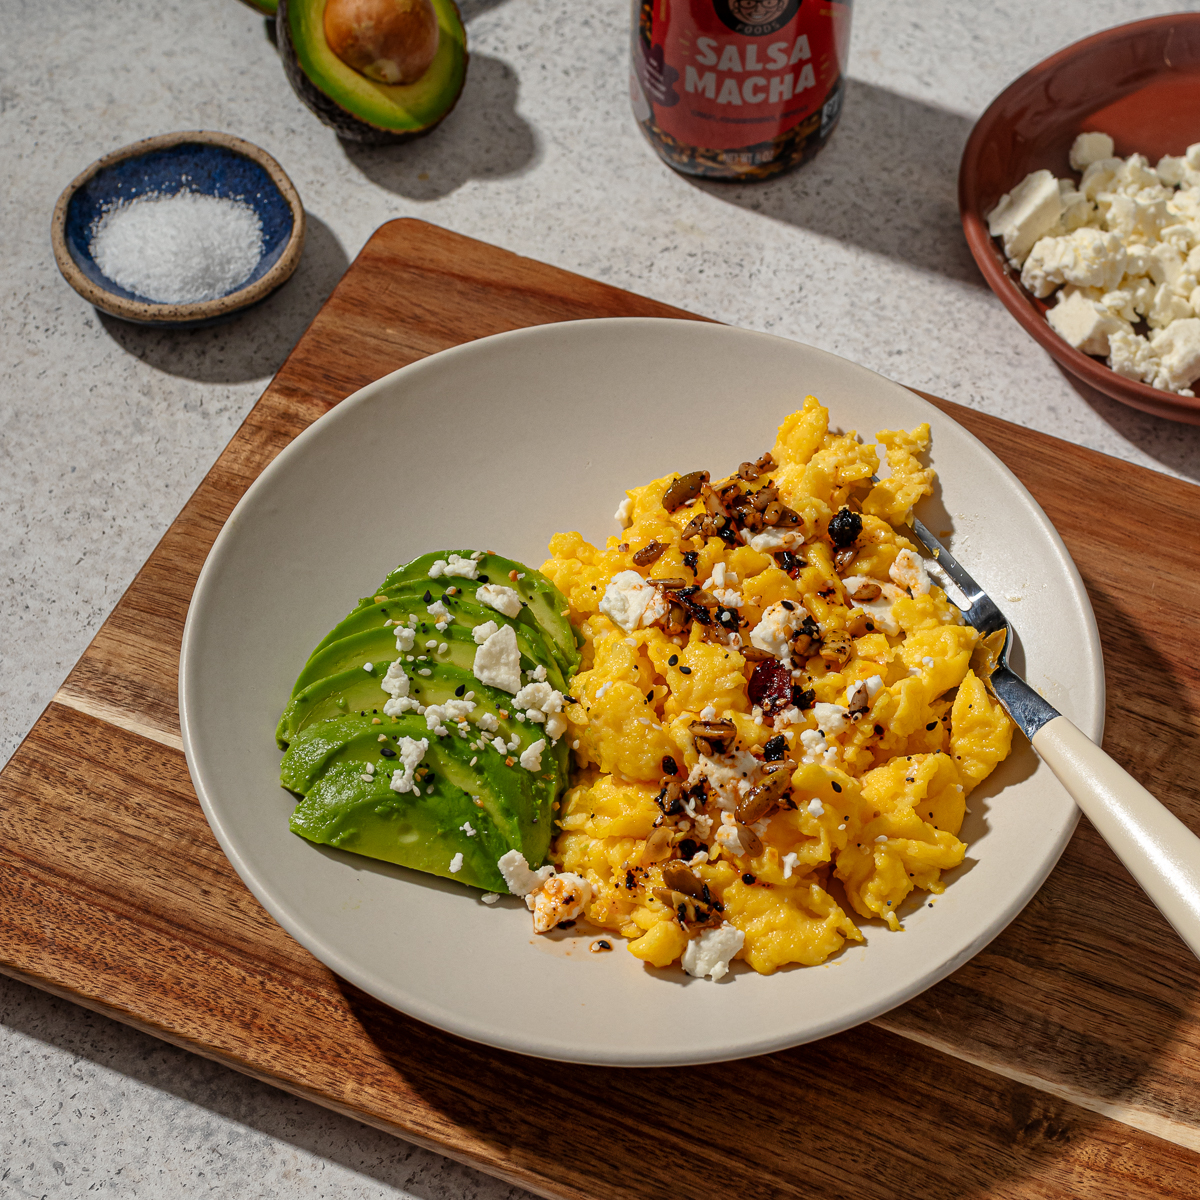 A serving of scrambled eggs without milk with sides and toppings.